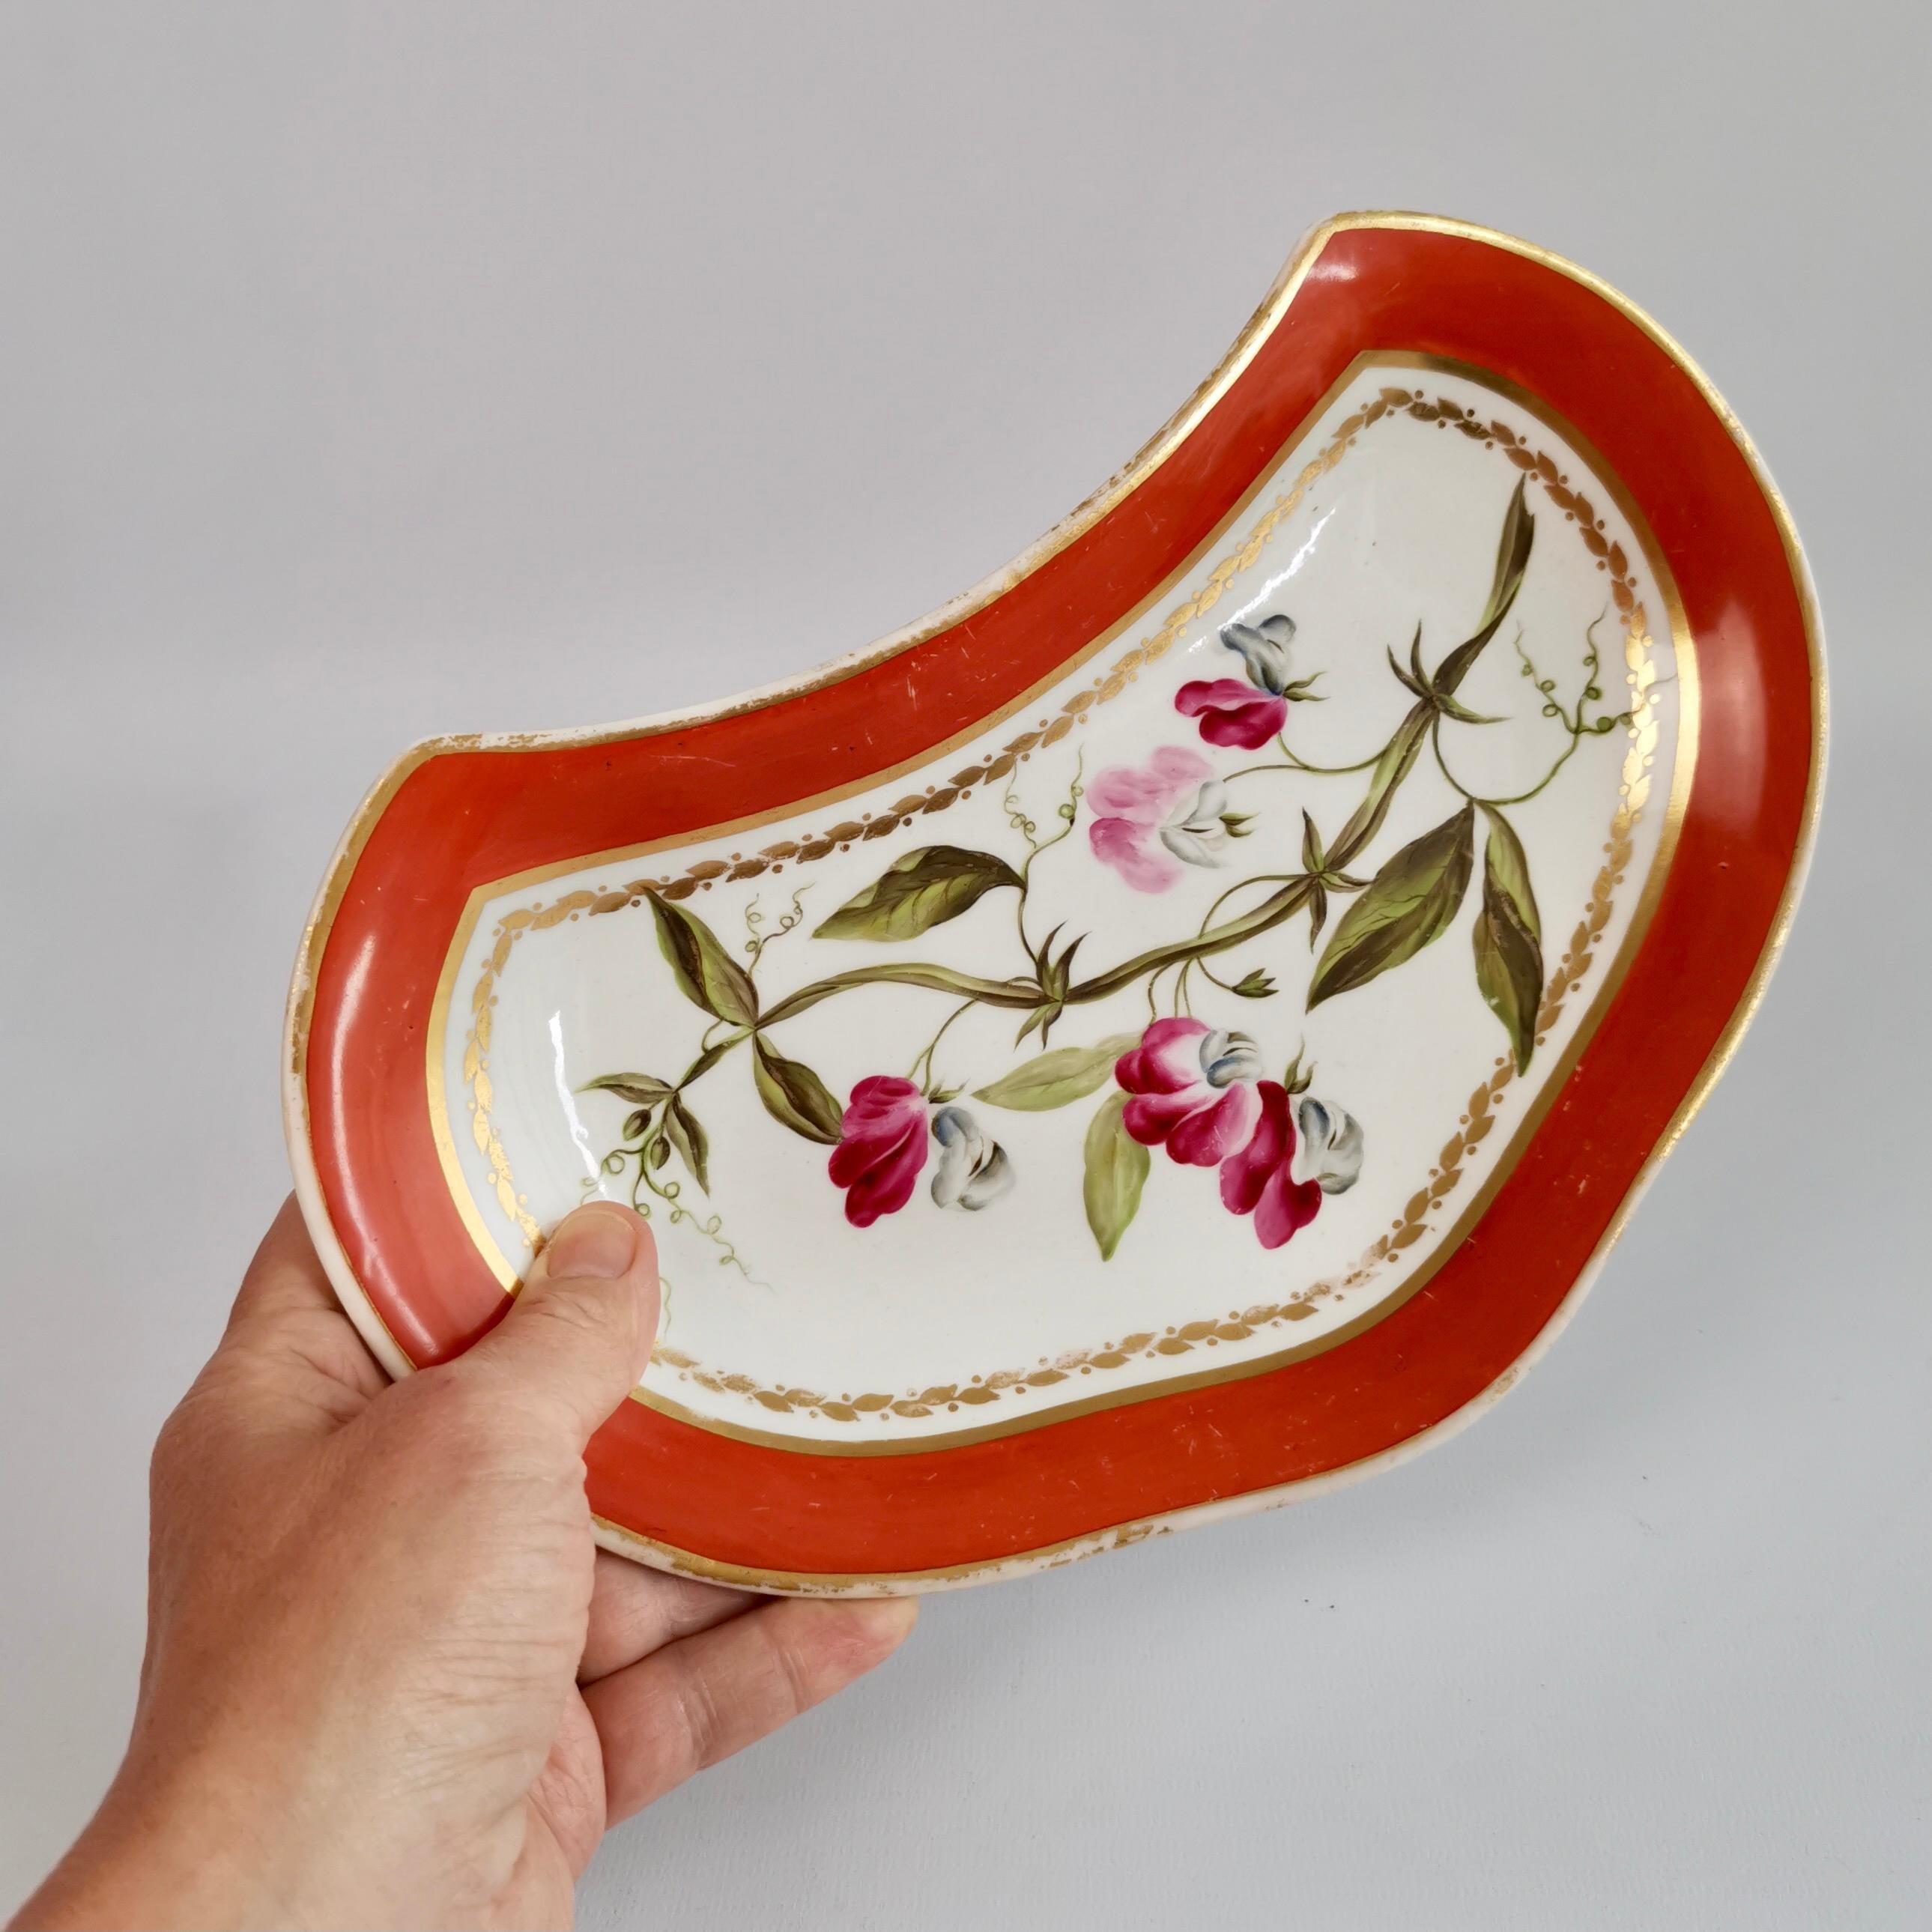 This is a stunning kidney shaped dish made by Derby between about 1795 and 1800 in the Regency era. The painting in the centre is attributed to the famous painter John Brewer.

The Derby Porcelain factory has its roots in the late 1740s, when